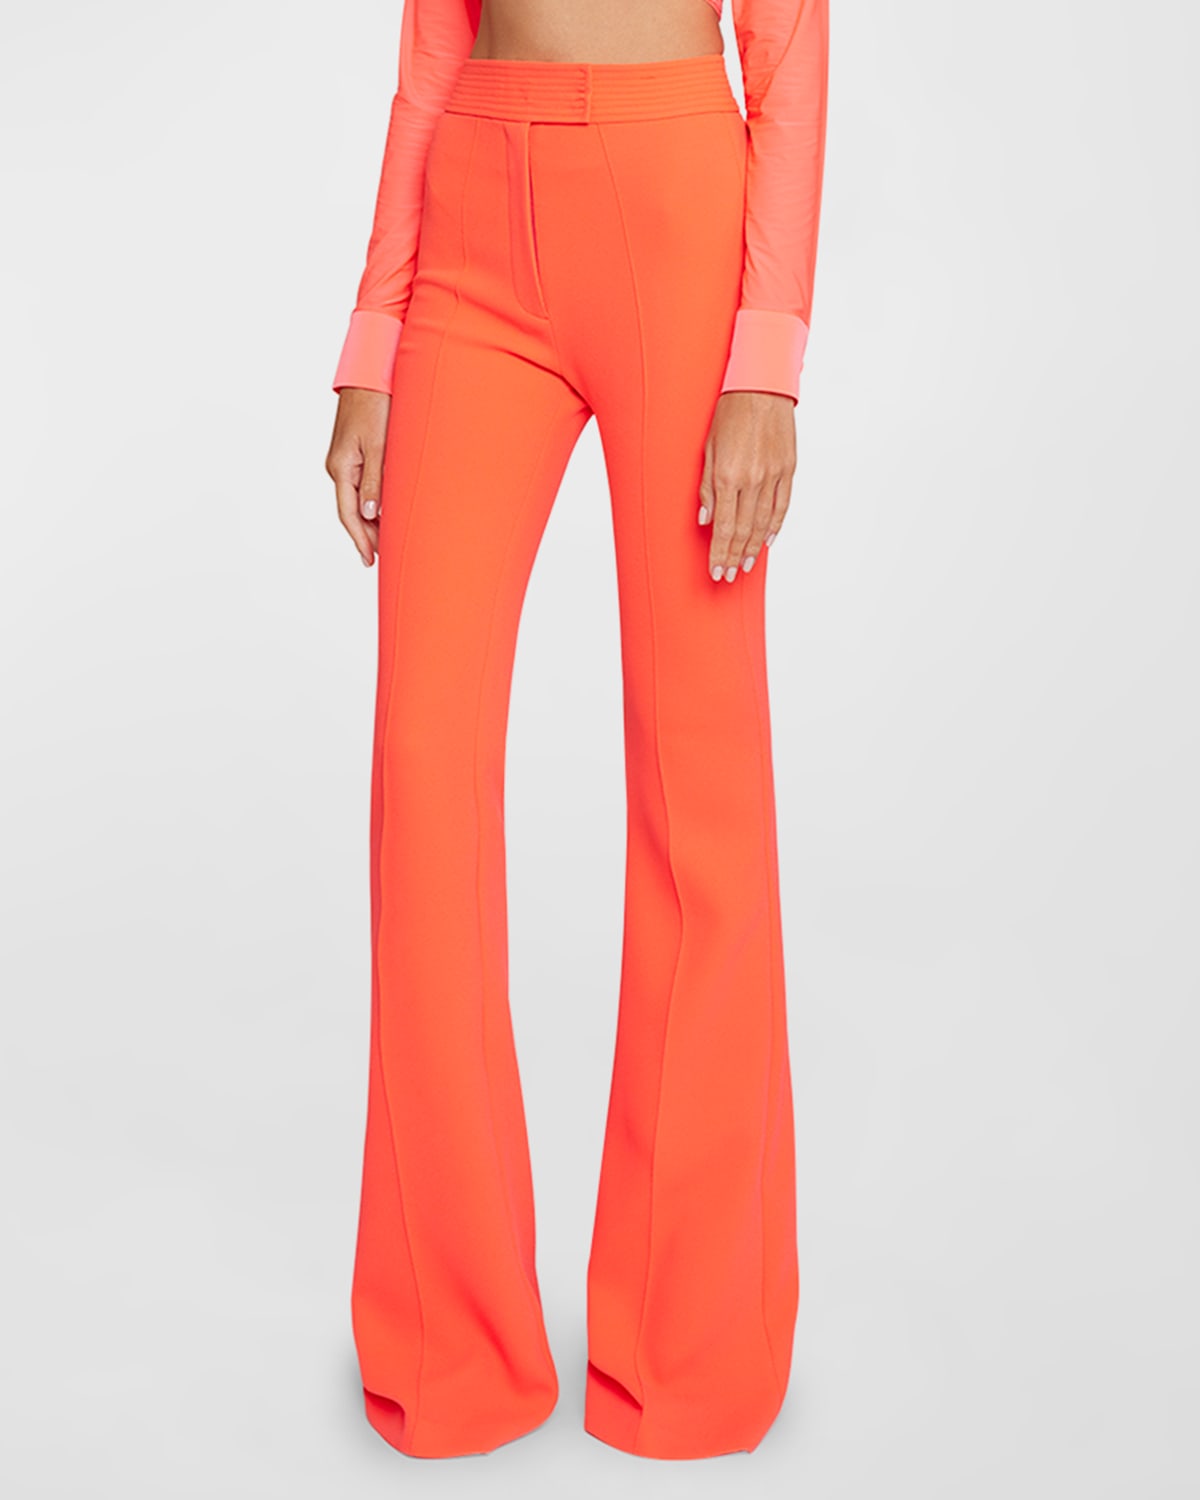 Alex Perry Marden Stretch Crepe Flared Pants In Pink